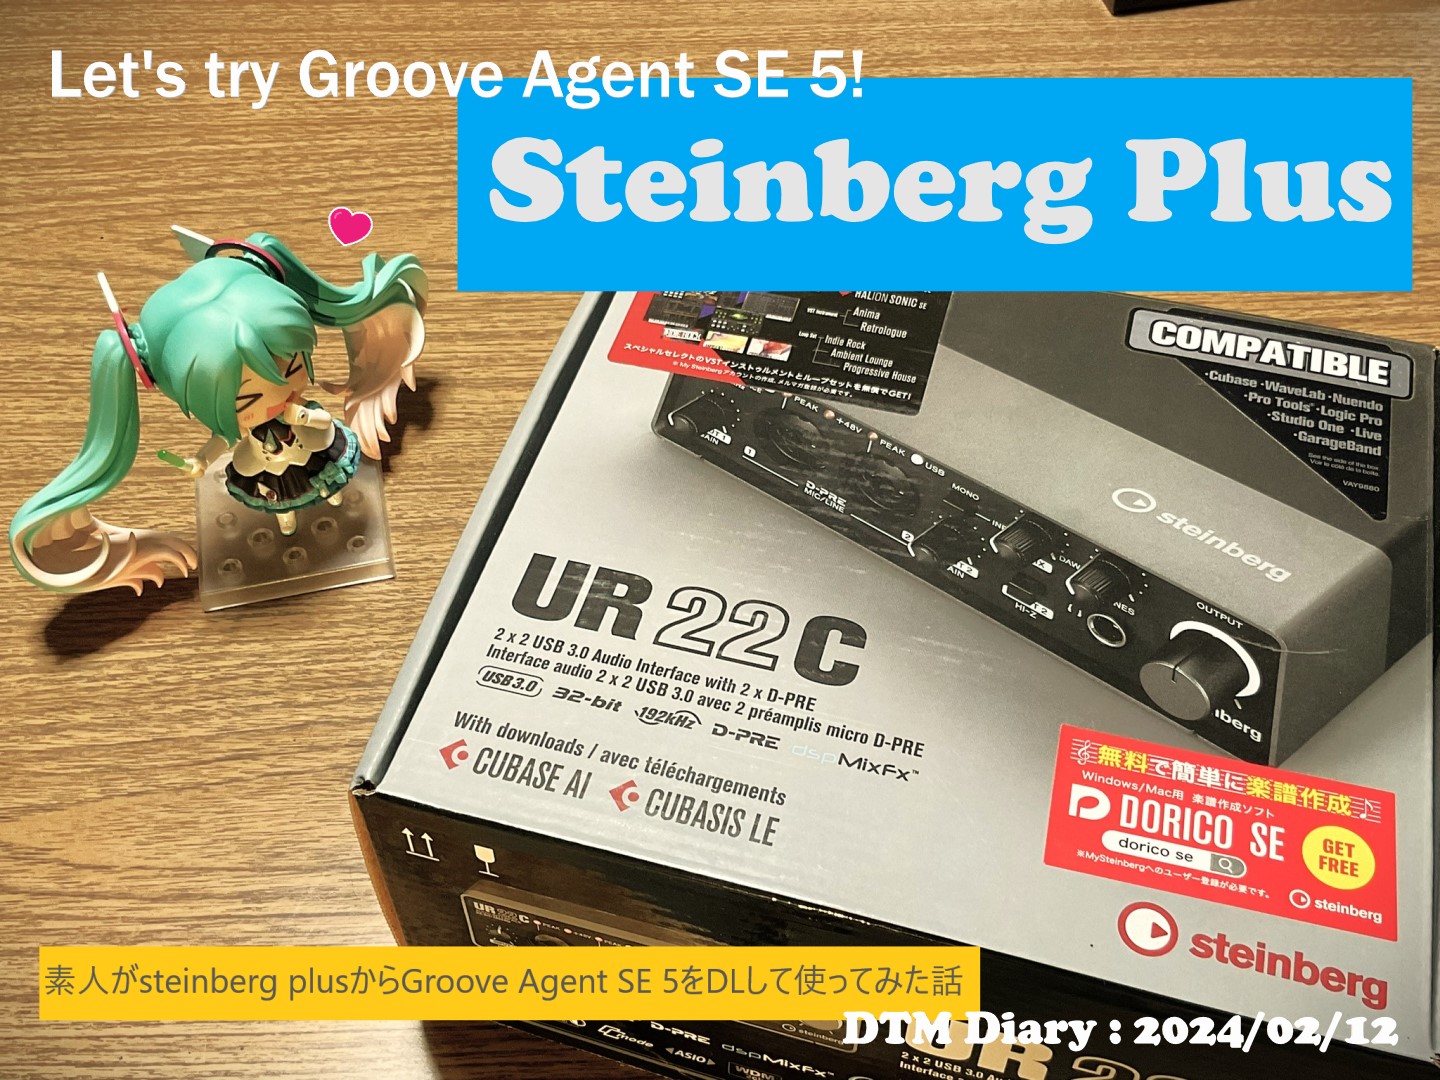 Let’s try Groove Agent SE 5! Steinberg Plus